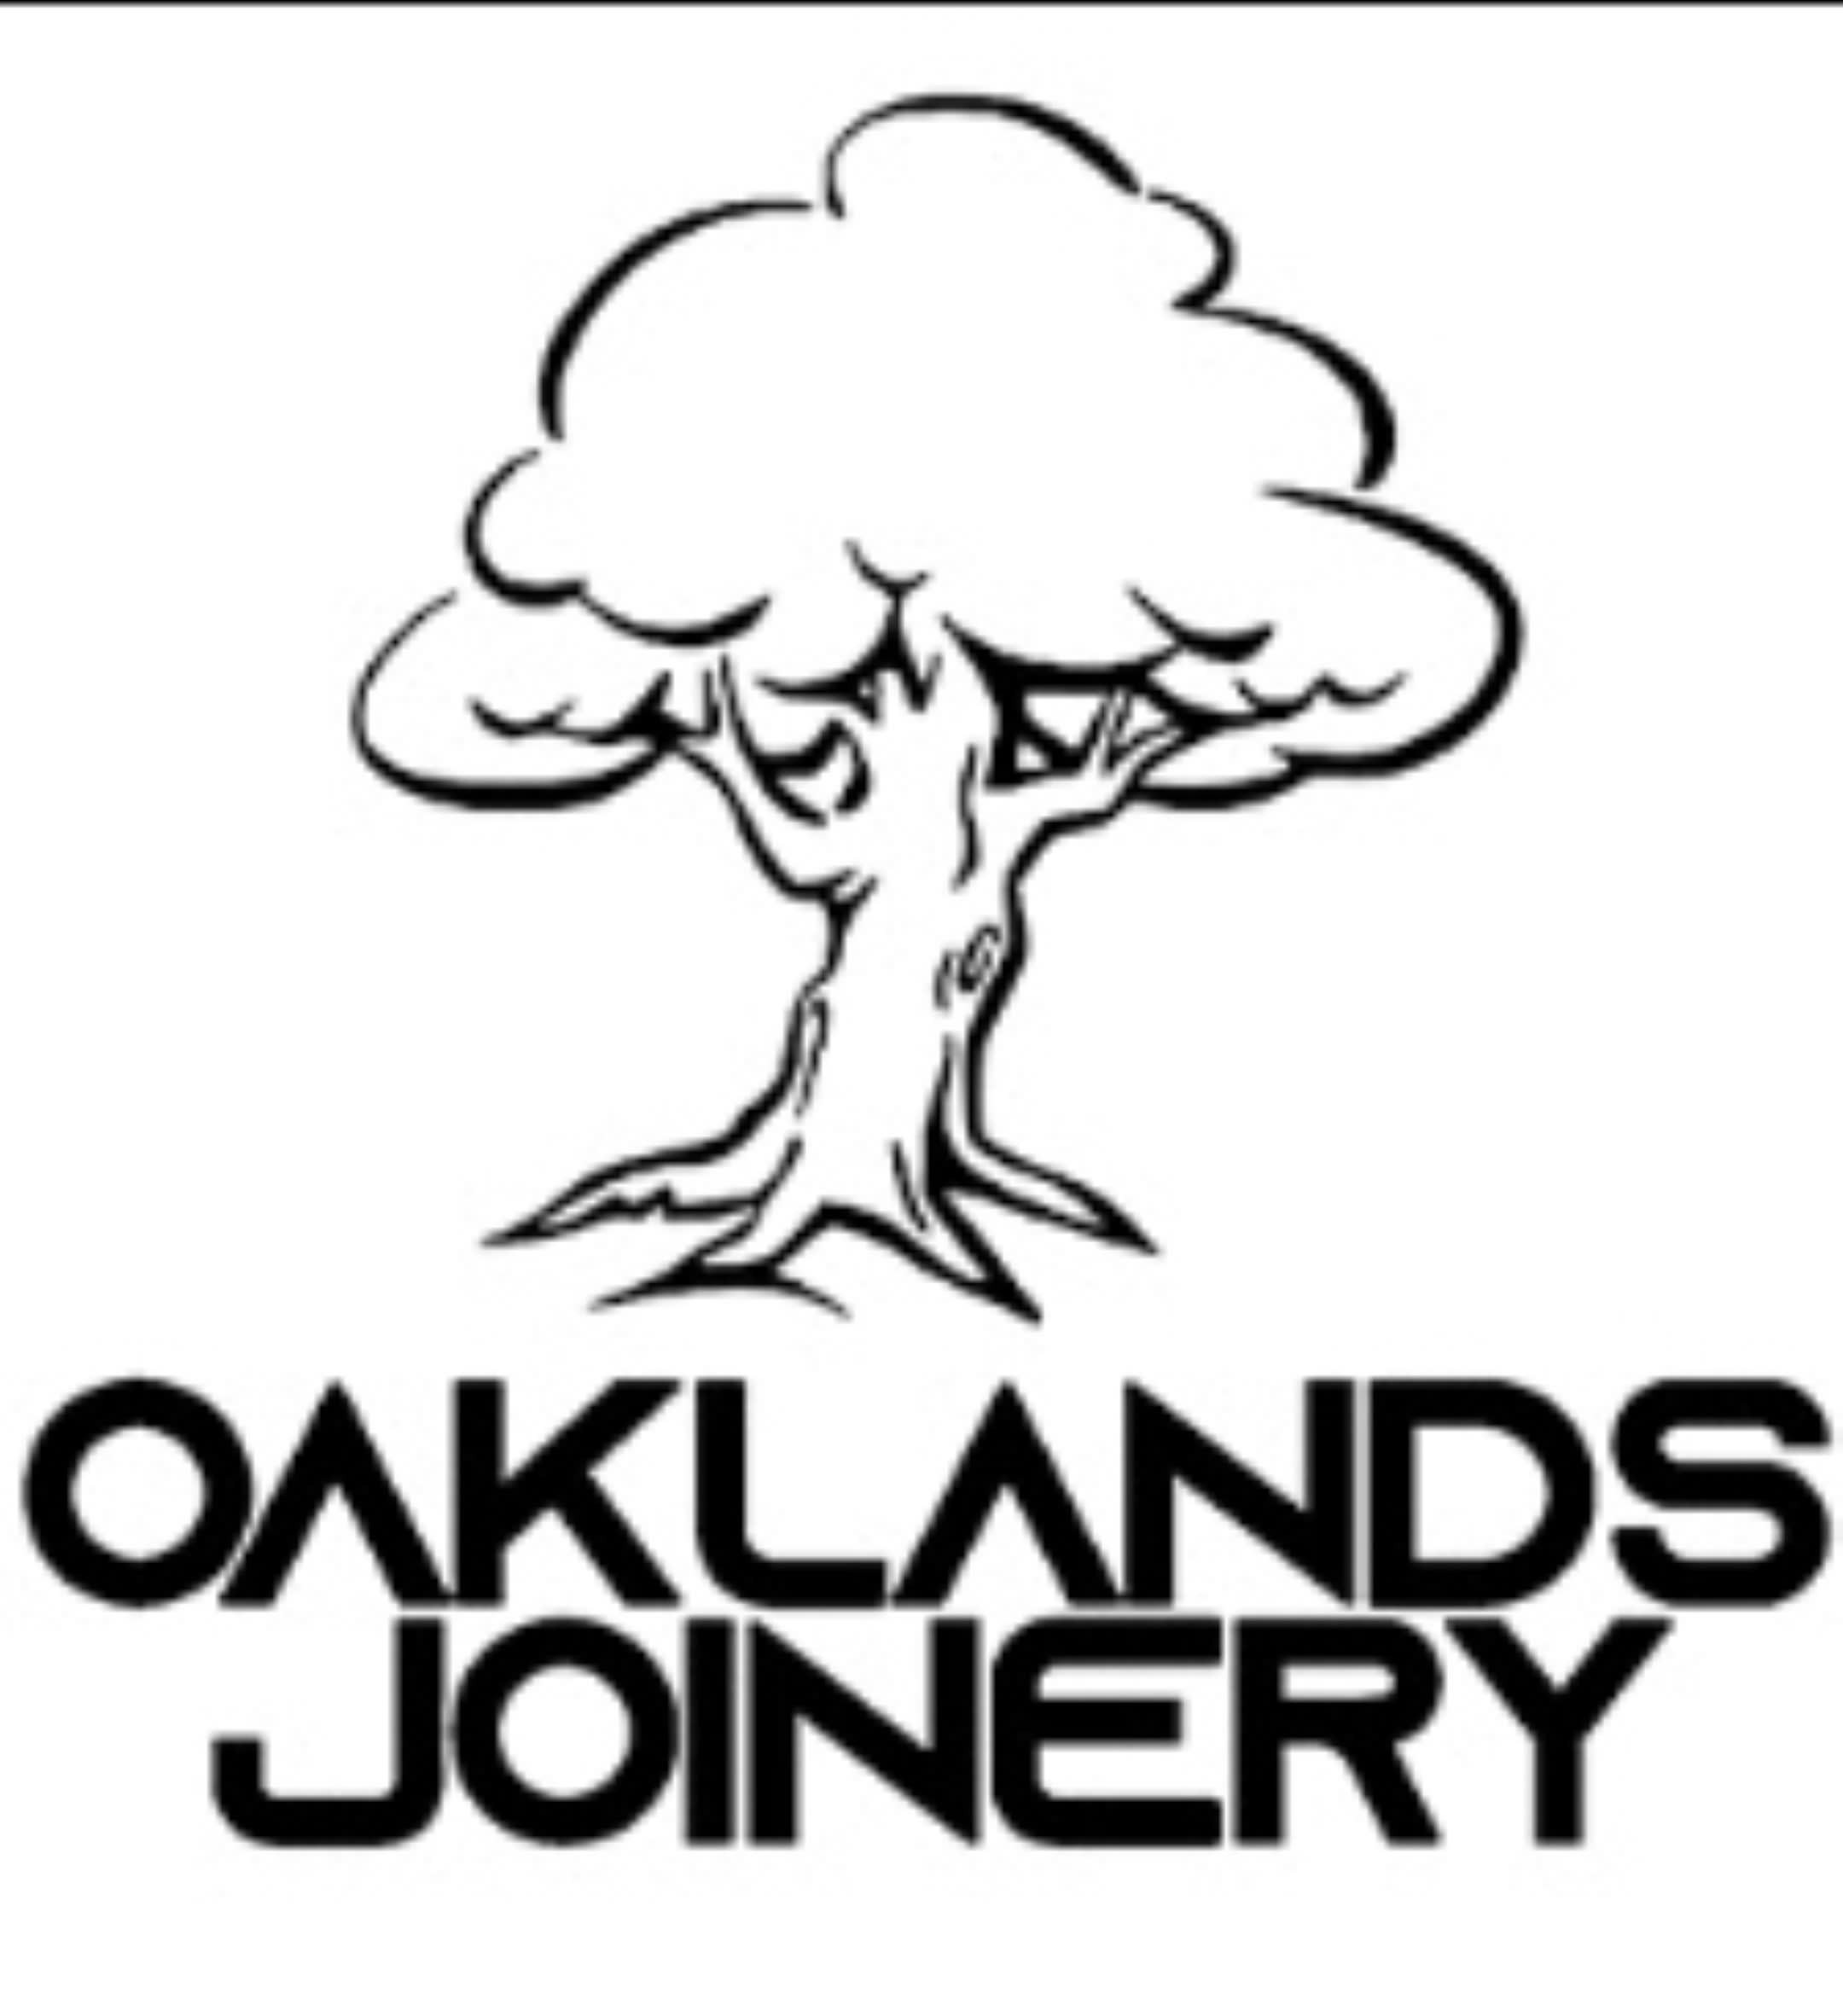 Oakland's Joinery York